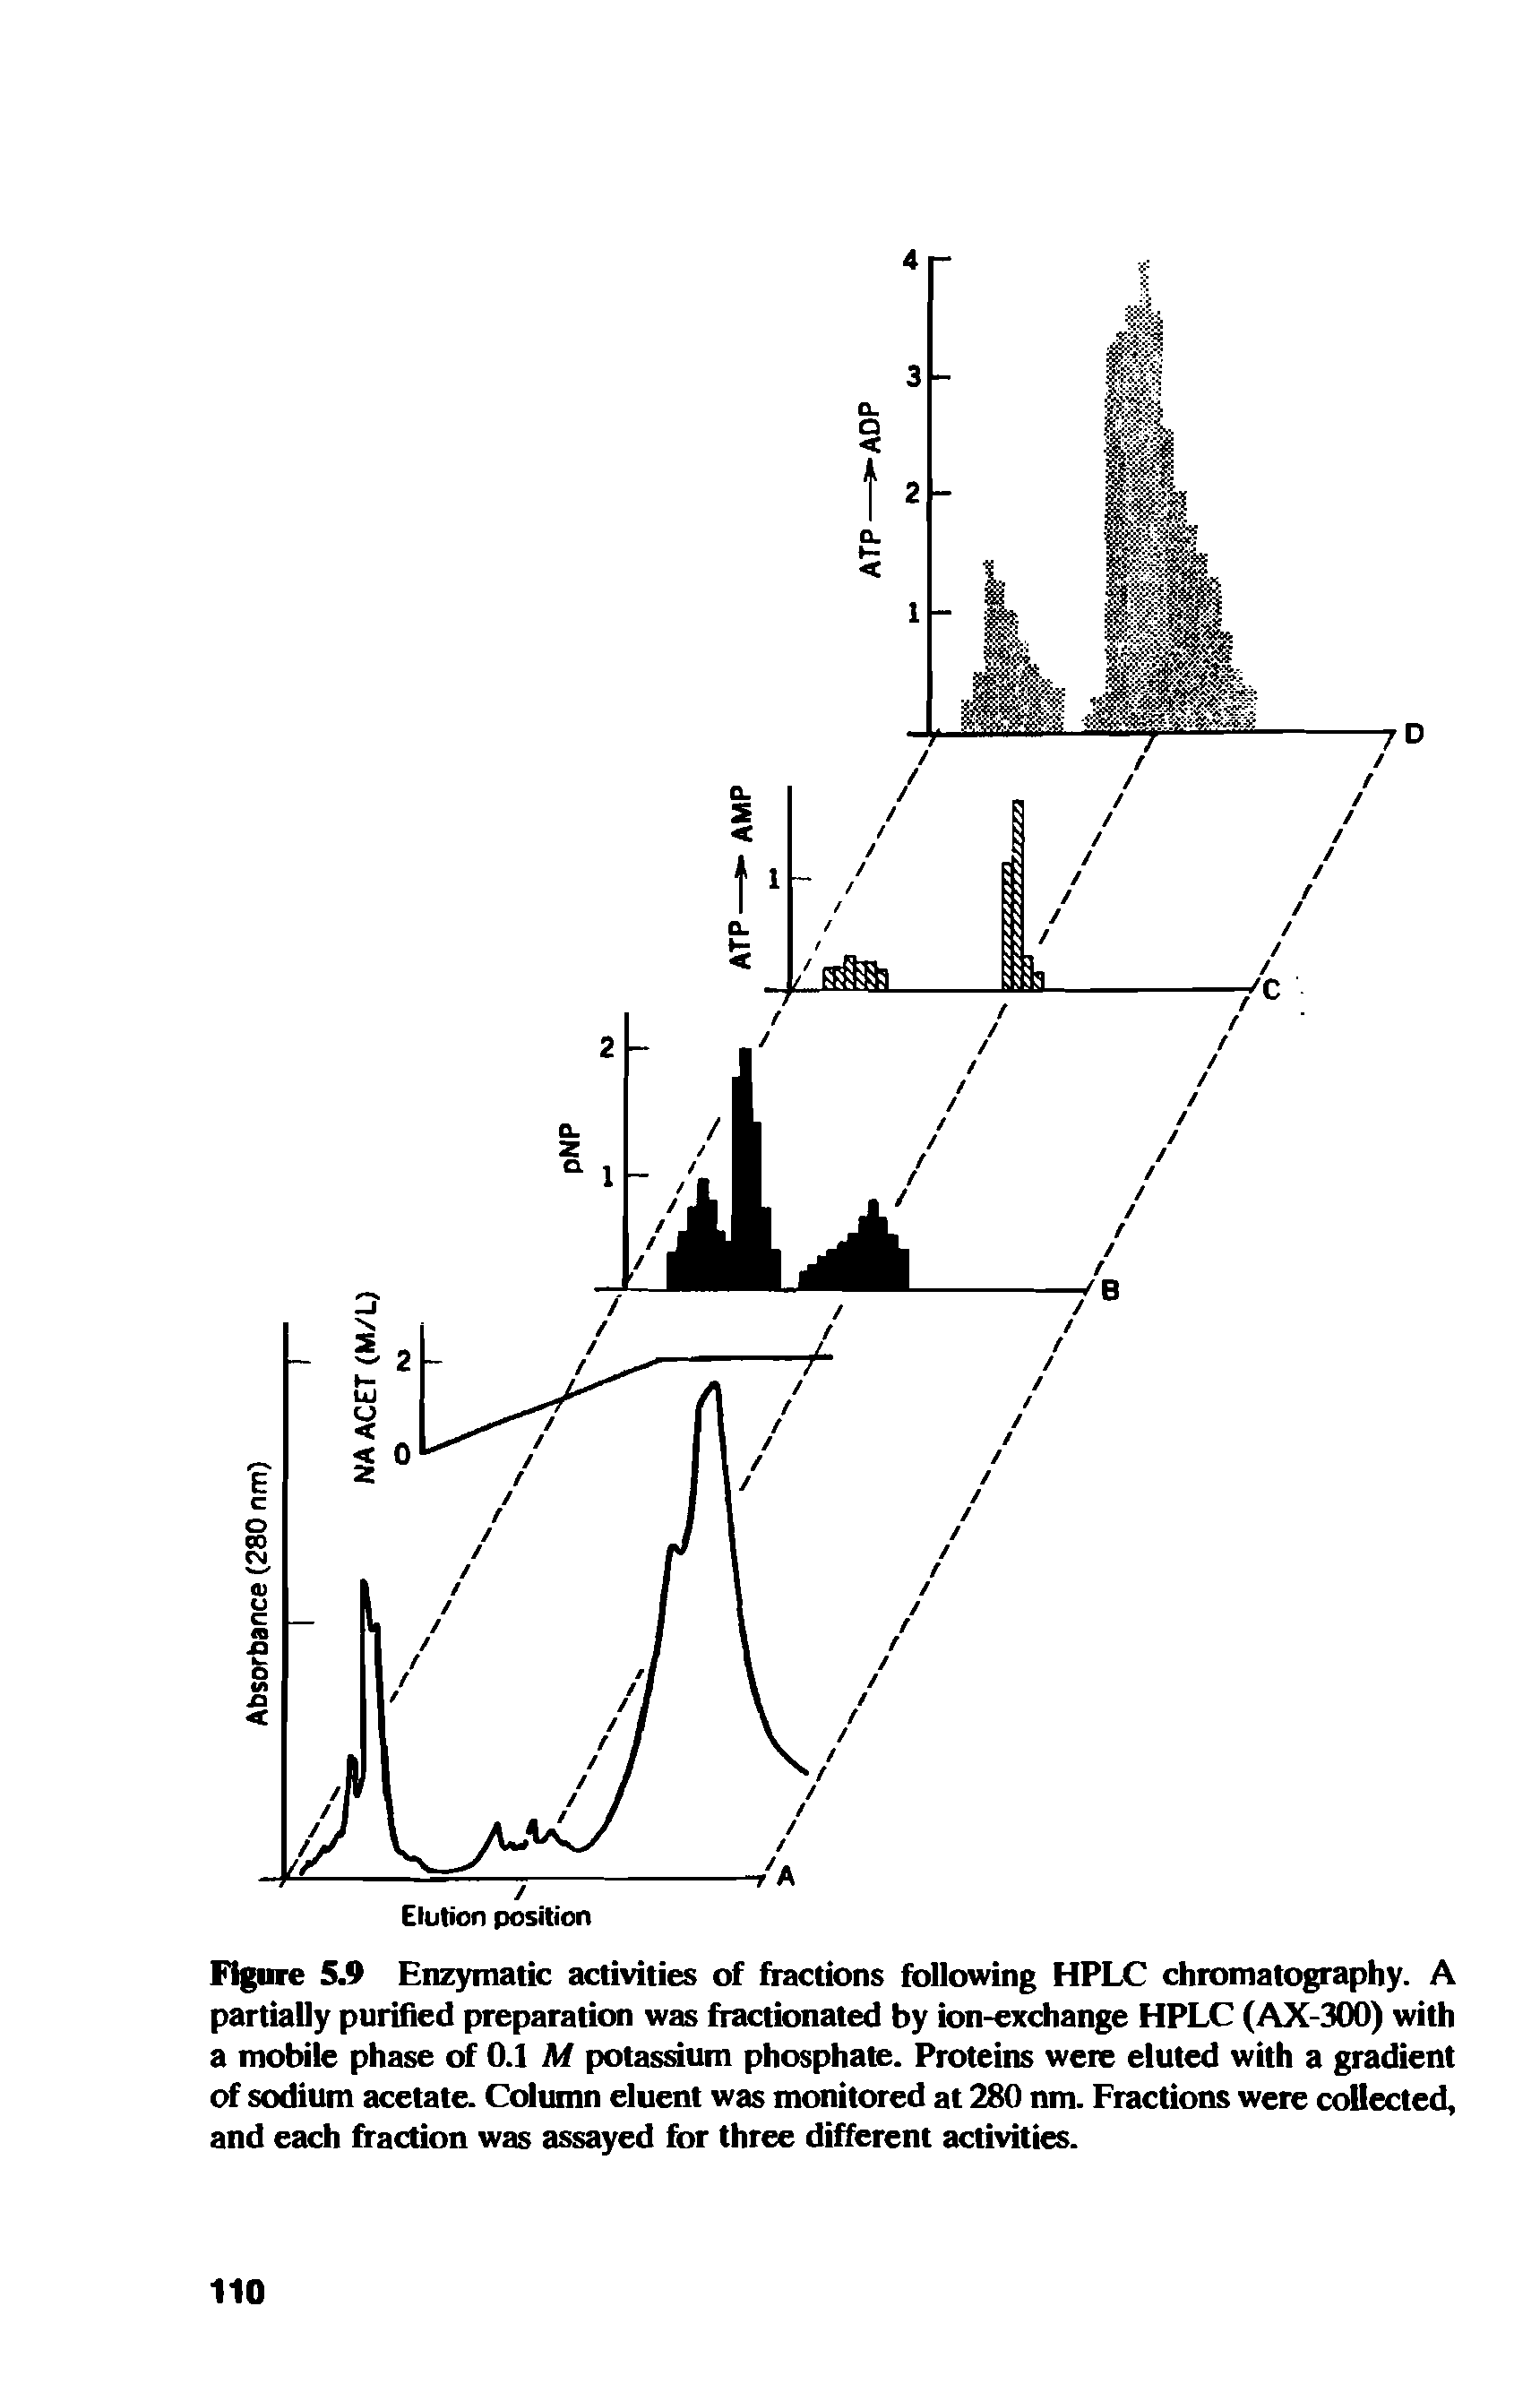 Figure 5.9 Enzymatic activities of fractions following HPLC chromatography. A partially purified preparation was fractionated by ion-exchange HPLC (AX-300) with a mobile phase of 0.1 M potassium phosphate. Proteins were eluted with a gradient of sodium acetate. Column eluent was monitored at 280 nm. Fractions were collected, and each fraction was assayed for three different activities.